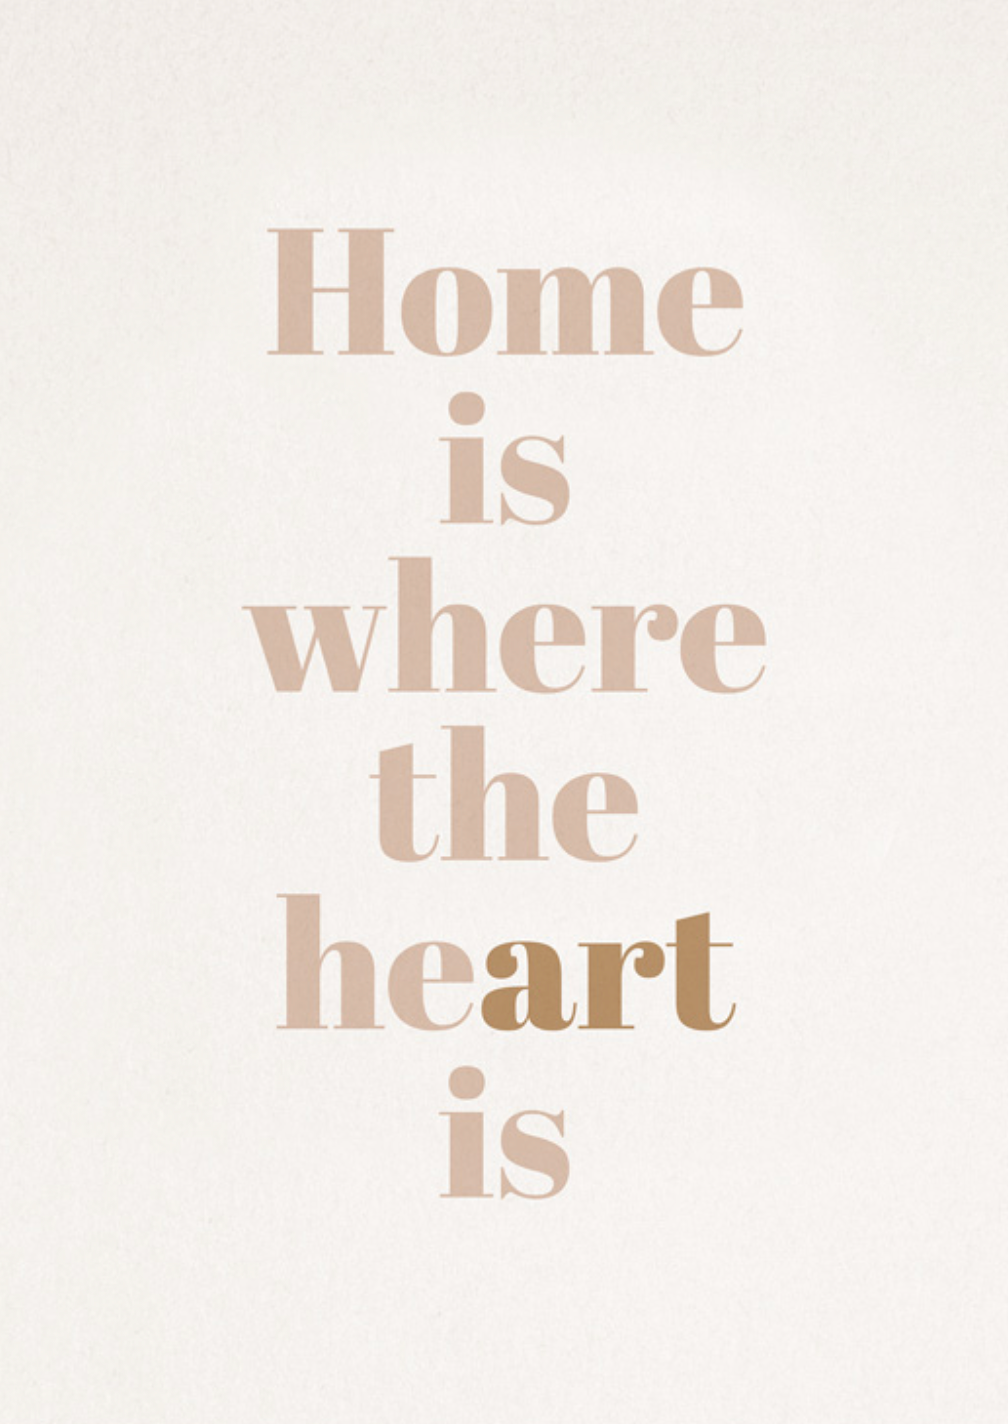 Where the Heart Is Poster